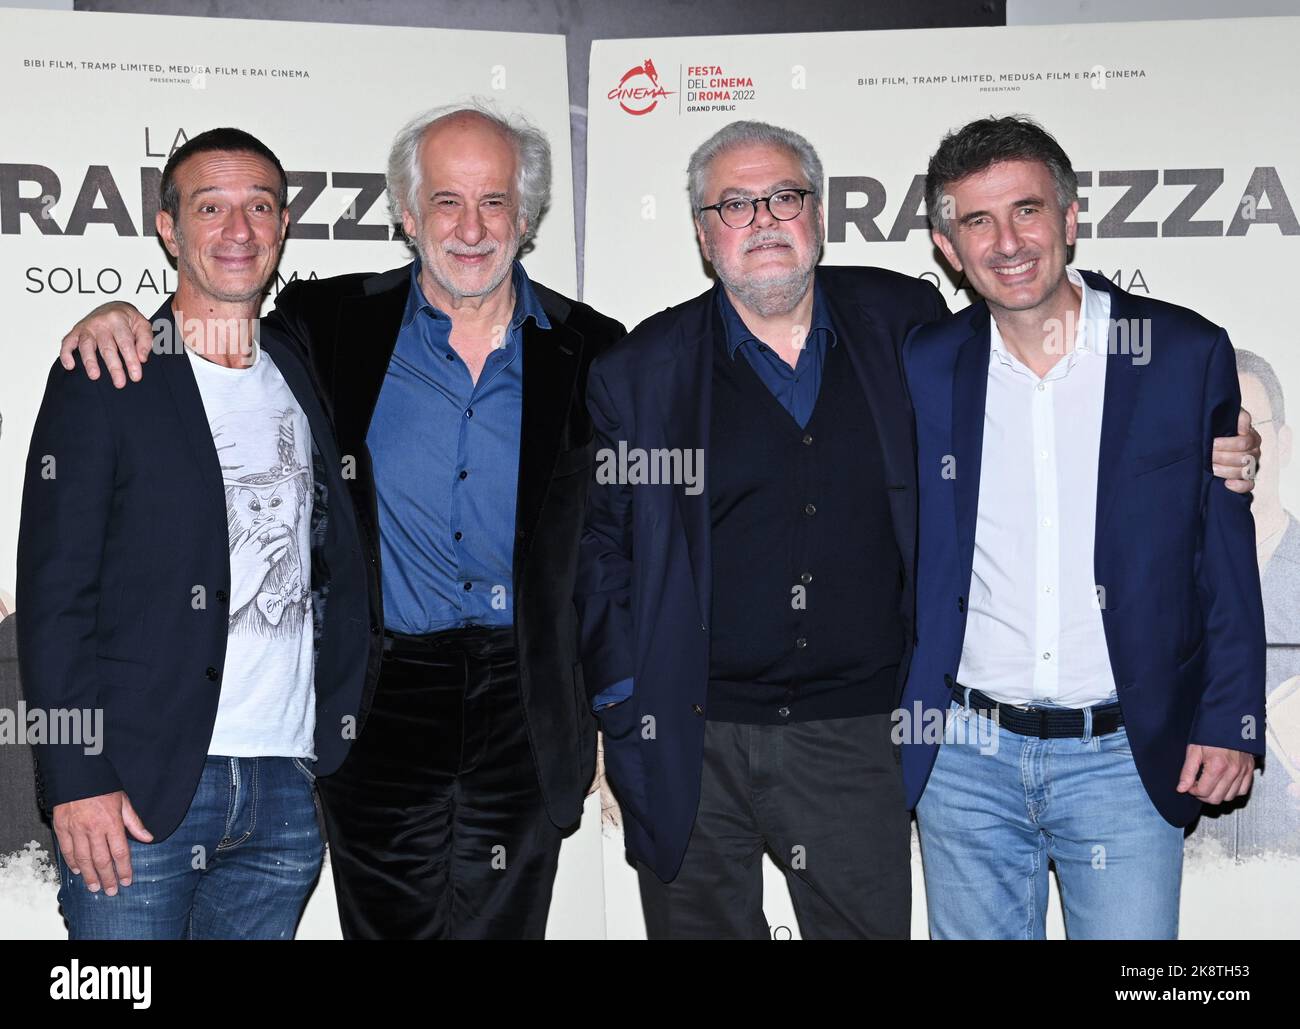 Milan, Italy. 24th Oct, 2022. Milan, Italy The strangeness feature by Roberto Andò, premiered at the Rome Film Festival with leading actors Toni Servillo, Ficarra and Picone In the picture: Roberto Andò, Toni Servillo, Ficarra and Picone Credit: Independent Photo Agency/Alamy Live News Stock Photo